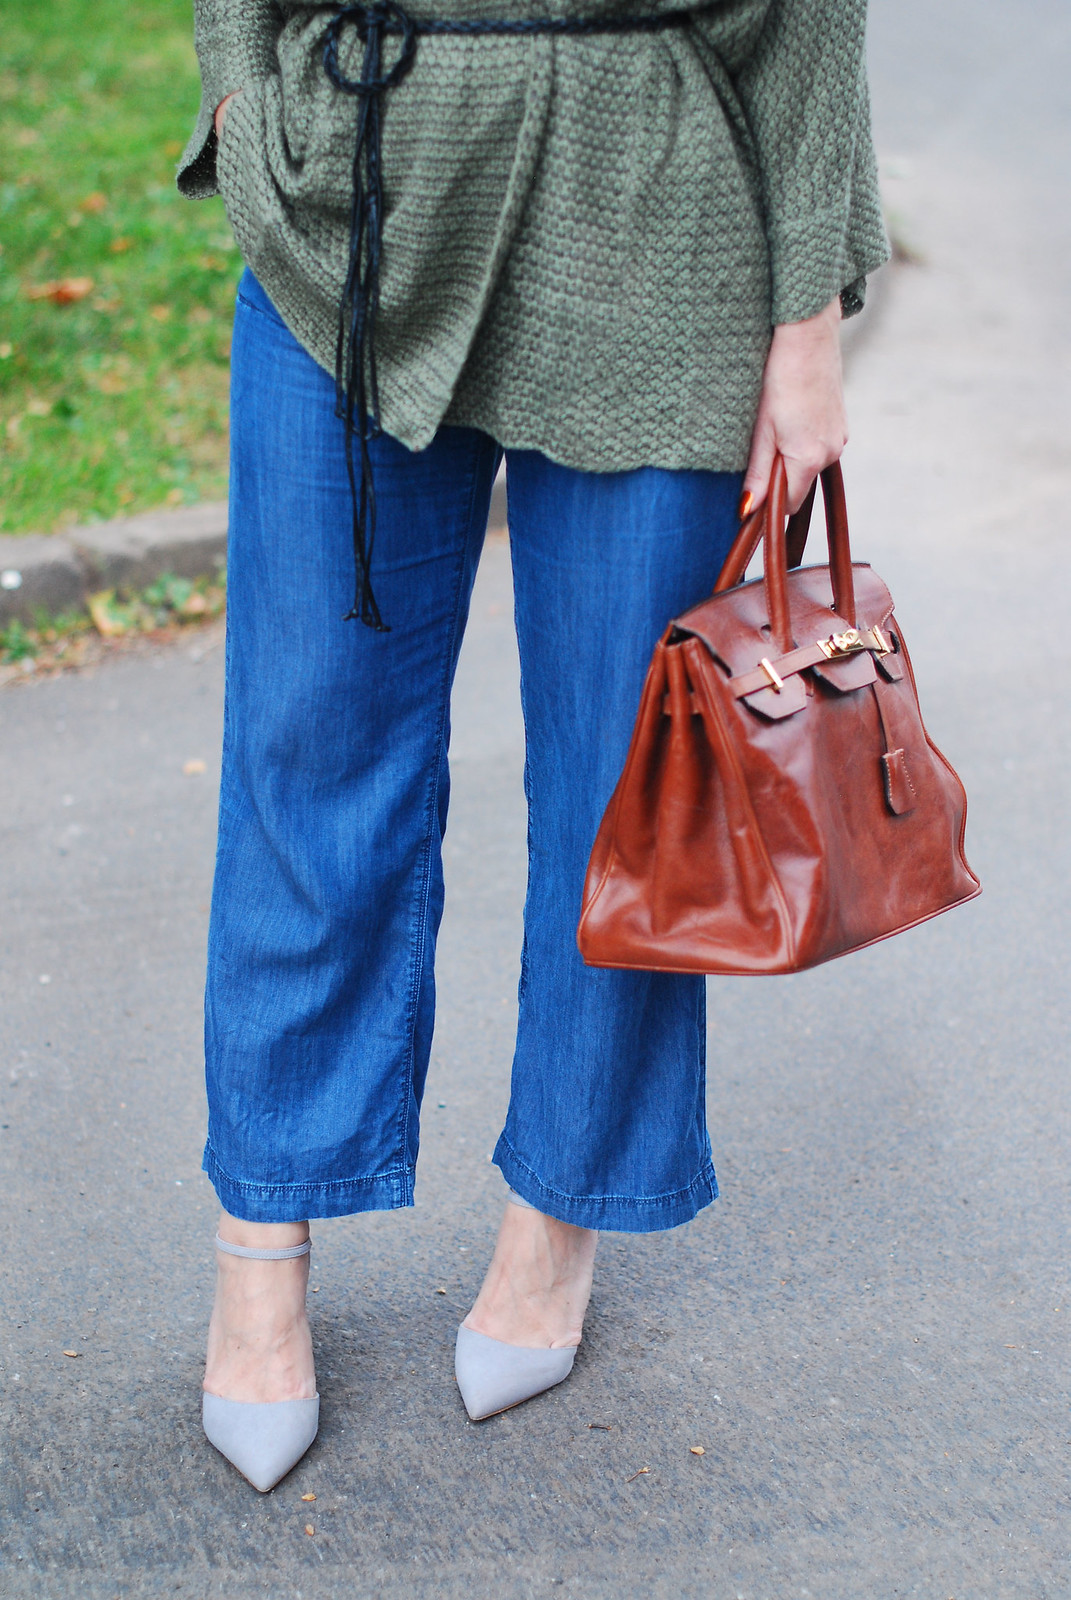 How to style cropped wide leg jeans for autumn (fall) - olive cardigan - Birkin-style bag - coloured neck scarf | Not Dressed As Lamb, style over 40